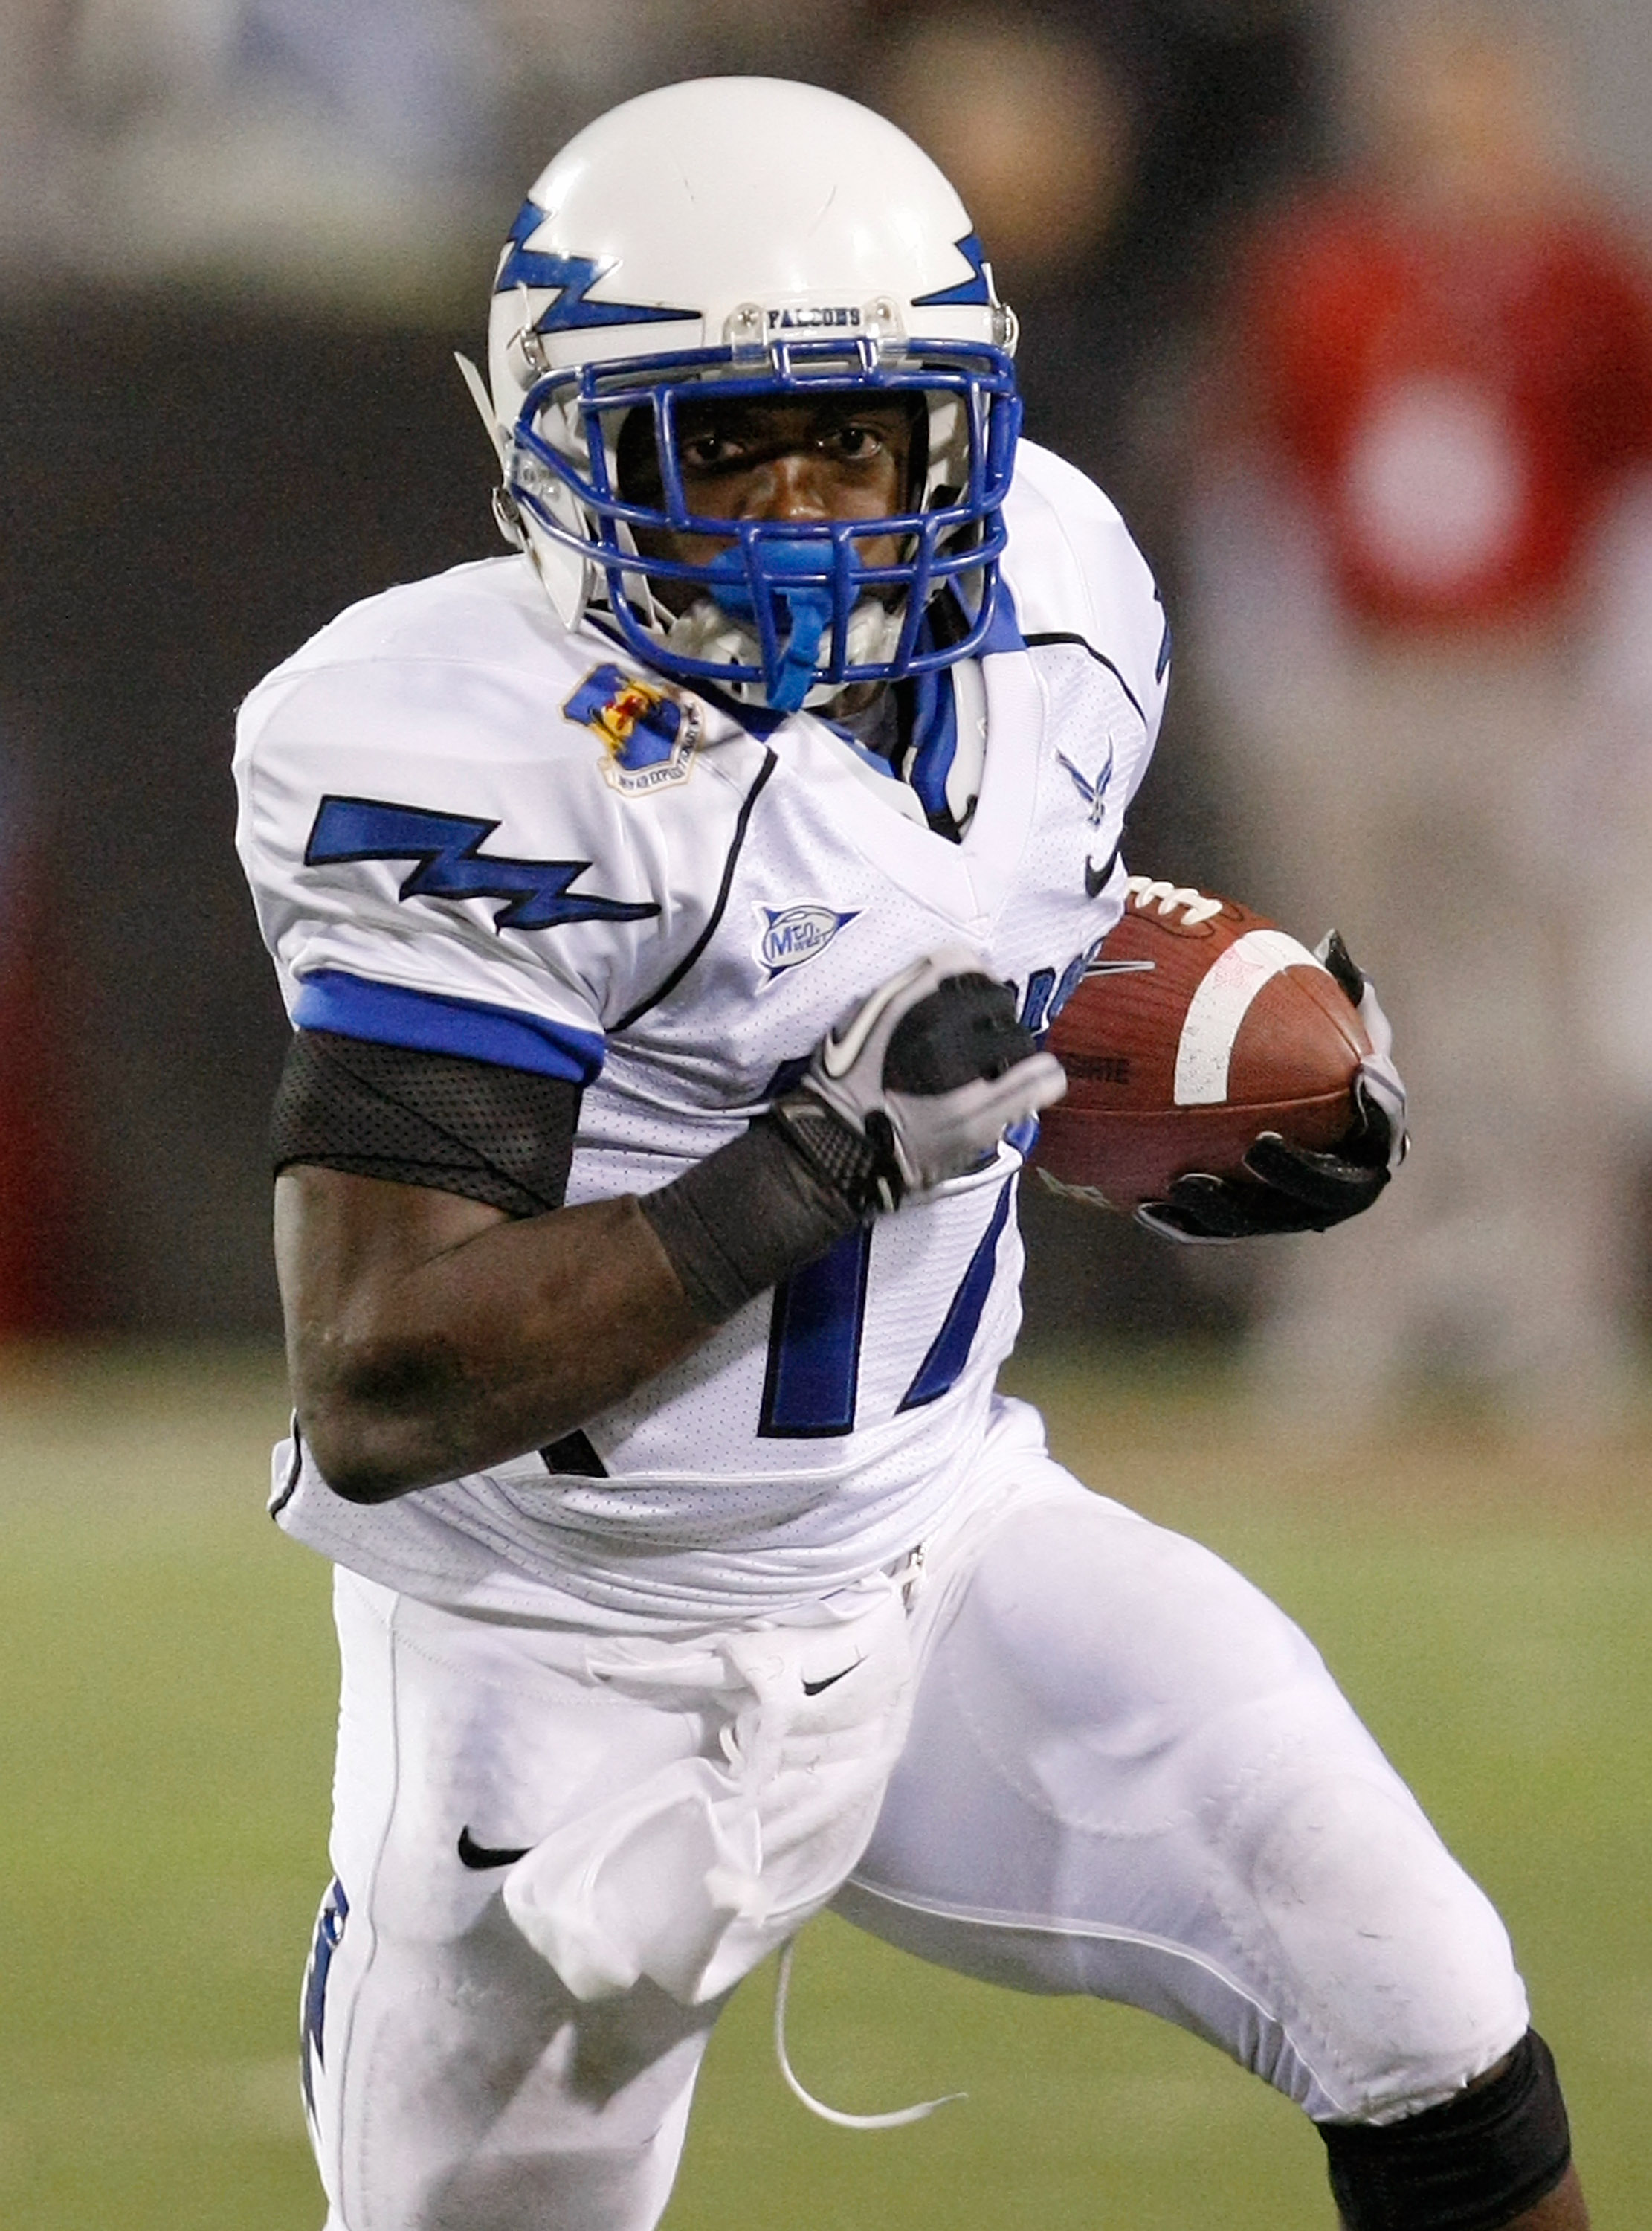 LAS VEGAS - NOVEMBER 18:  Asher Clark #17 of the Air Force Falcons runs for yardage against the UNLV Rebels during their game at Sam Boyd Stadium November 18, 2010 in Las Vegas, Nevada. Air Force won 35-20.  (Photo by Ethan Miller/Getty Images)